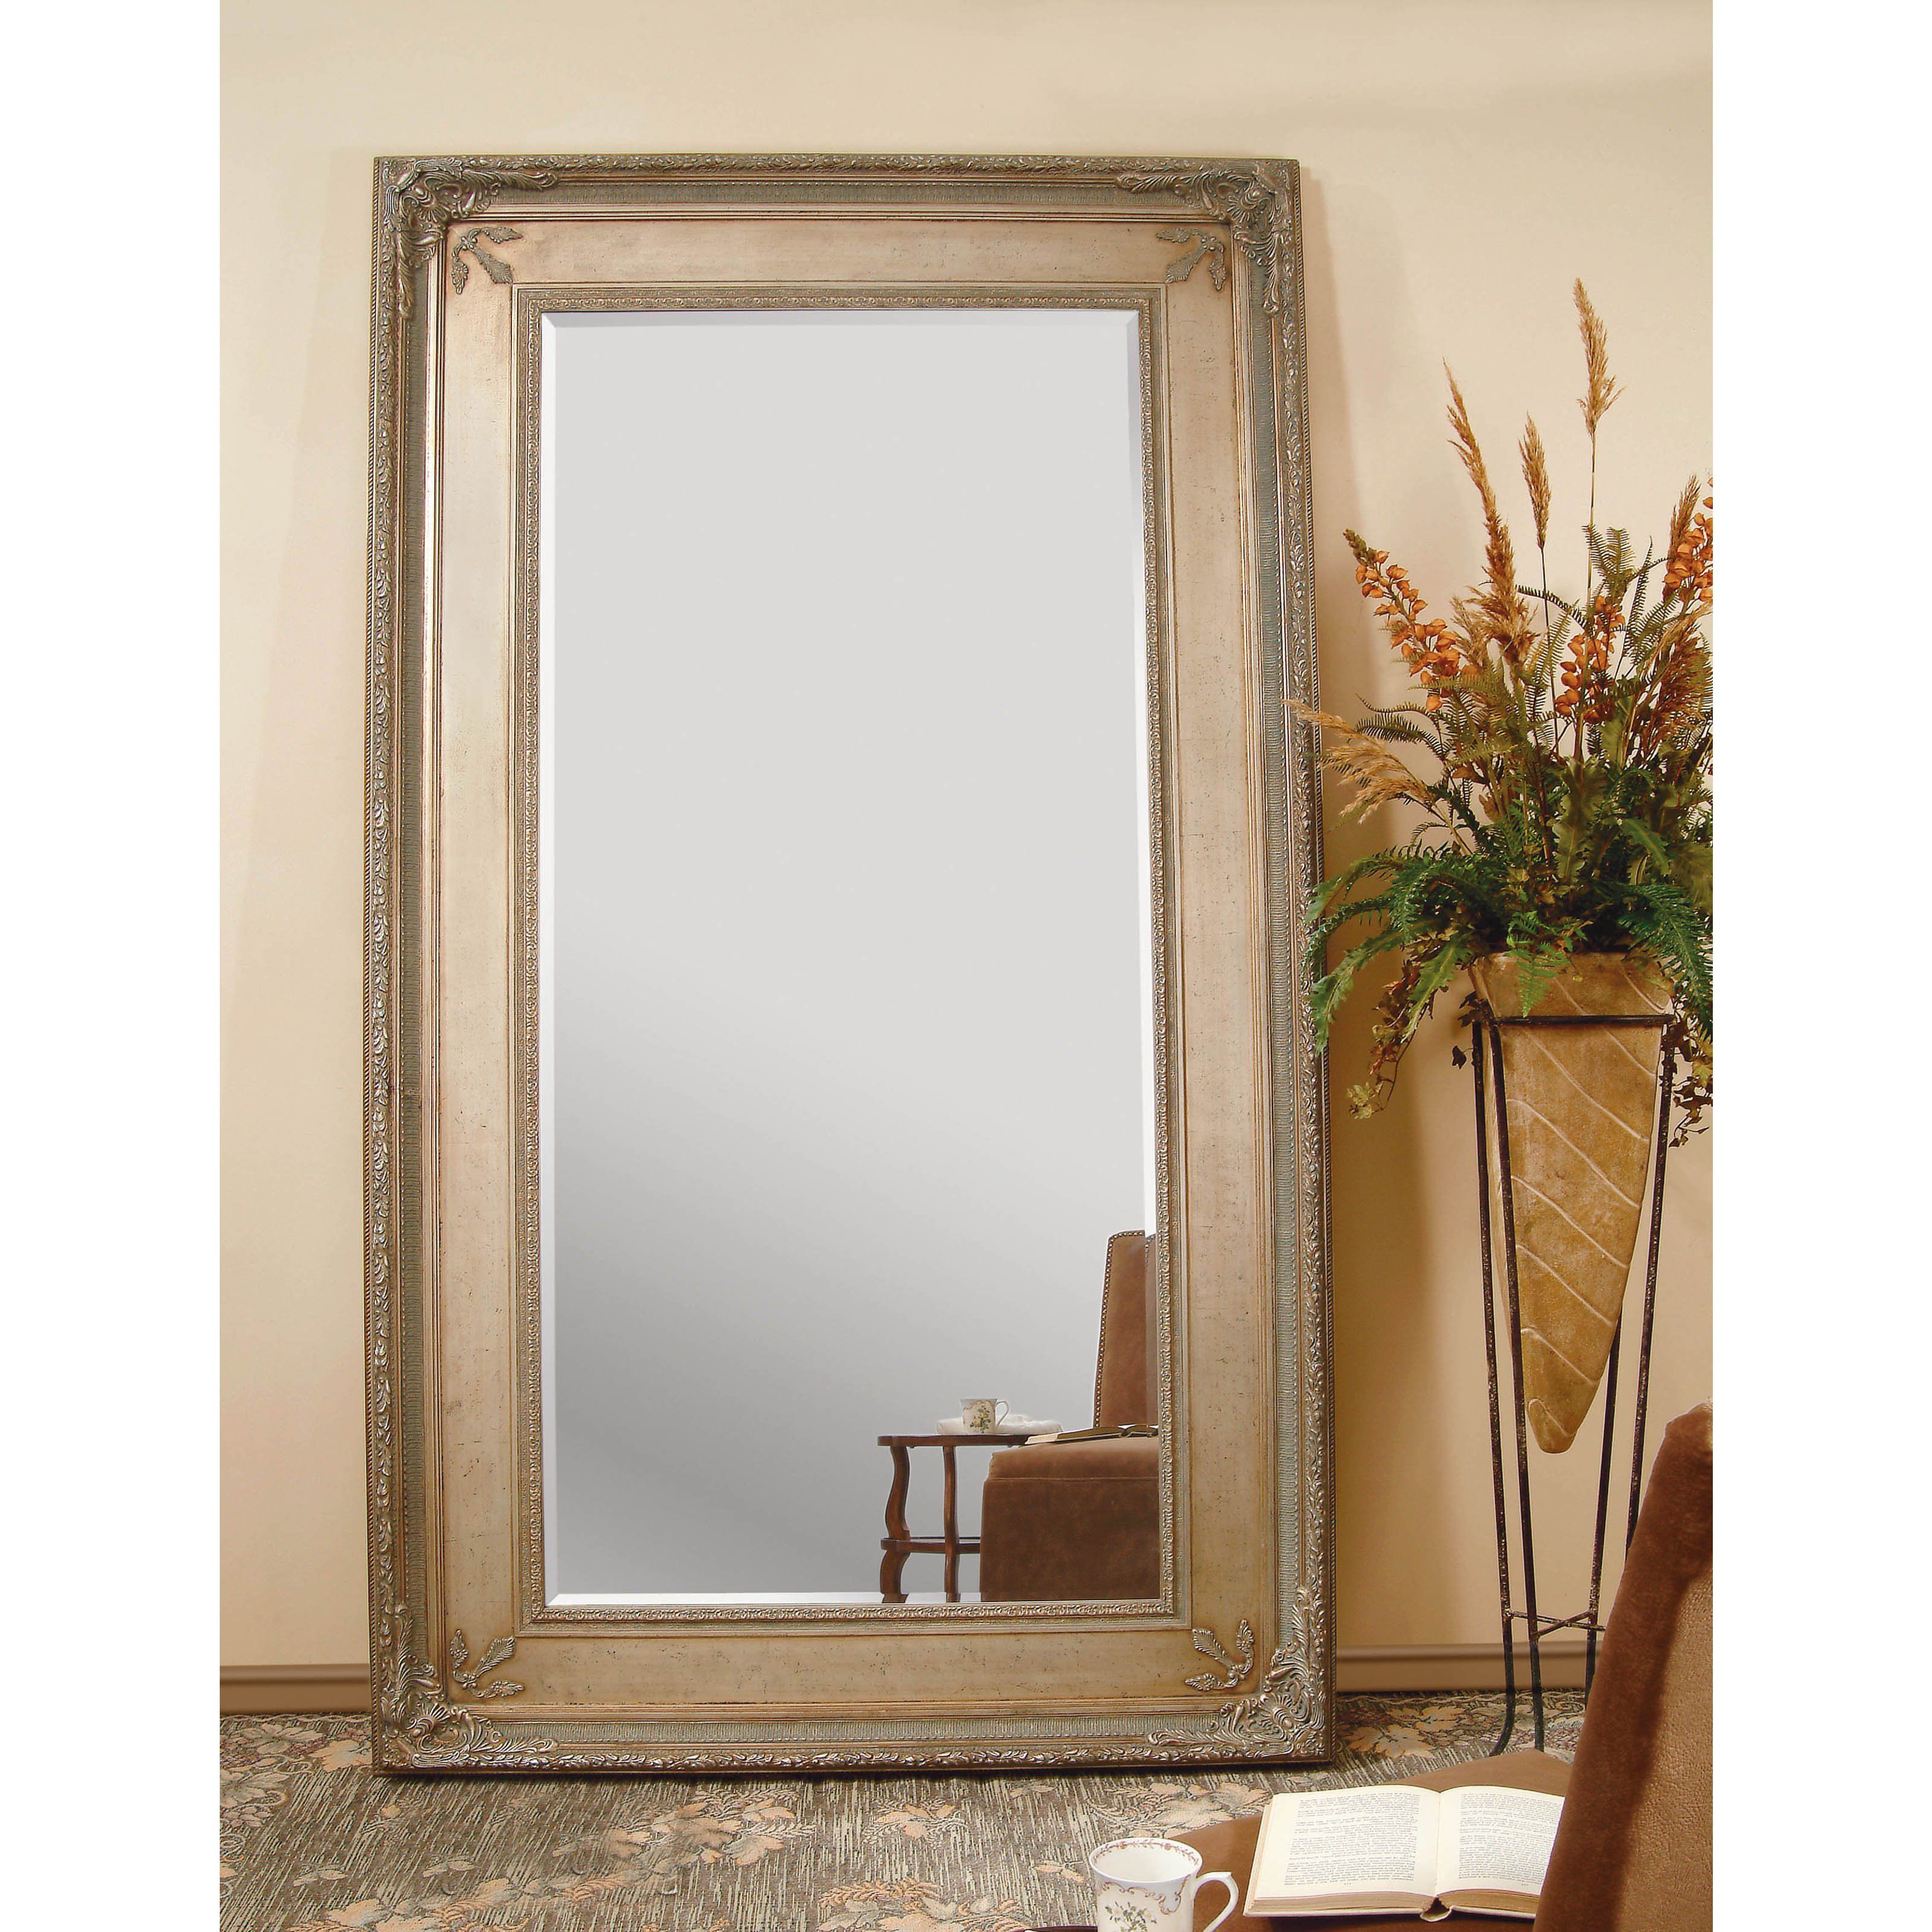 Most Recent Katherine Leaning Wall Mirror – 54w X 96h In (View 9 of 20)